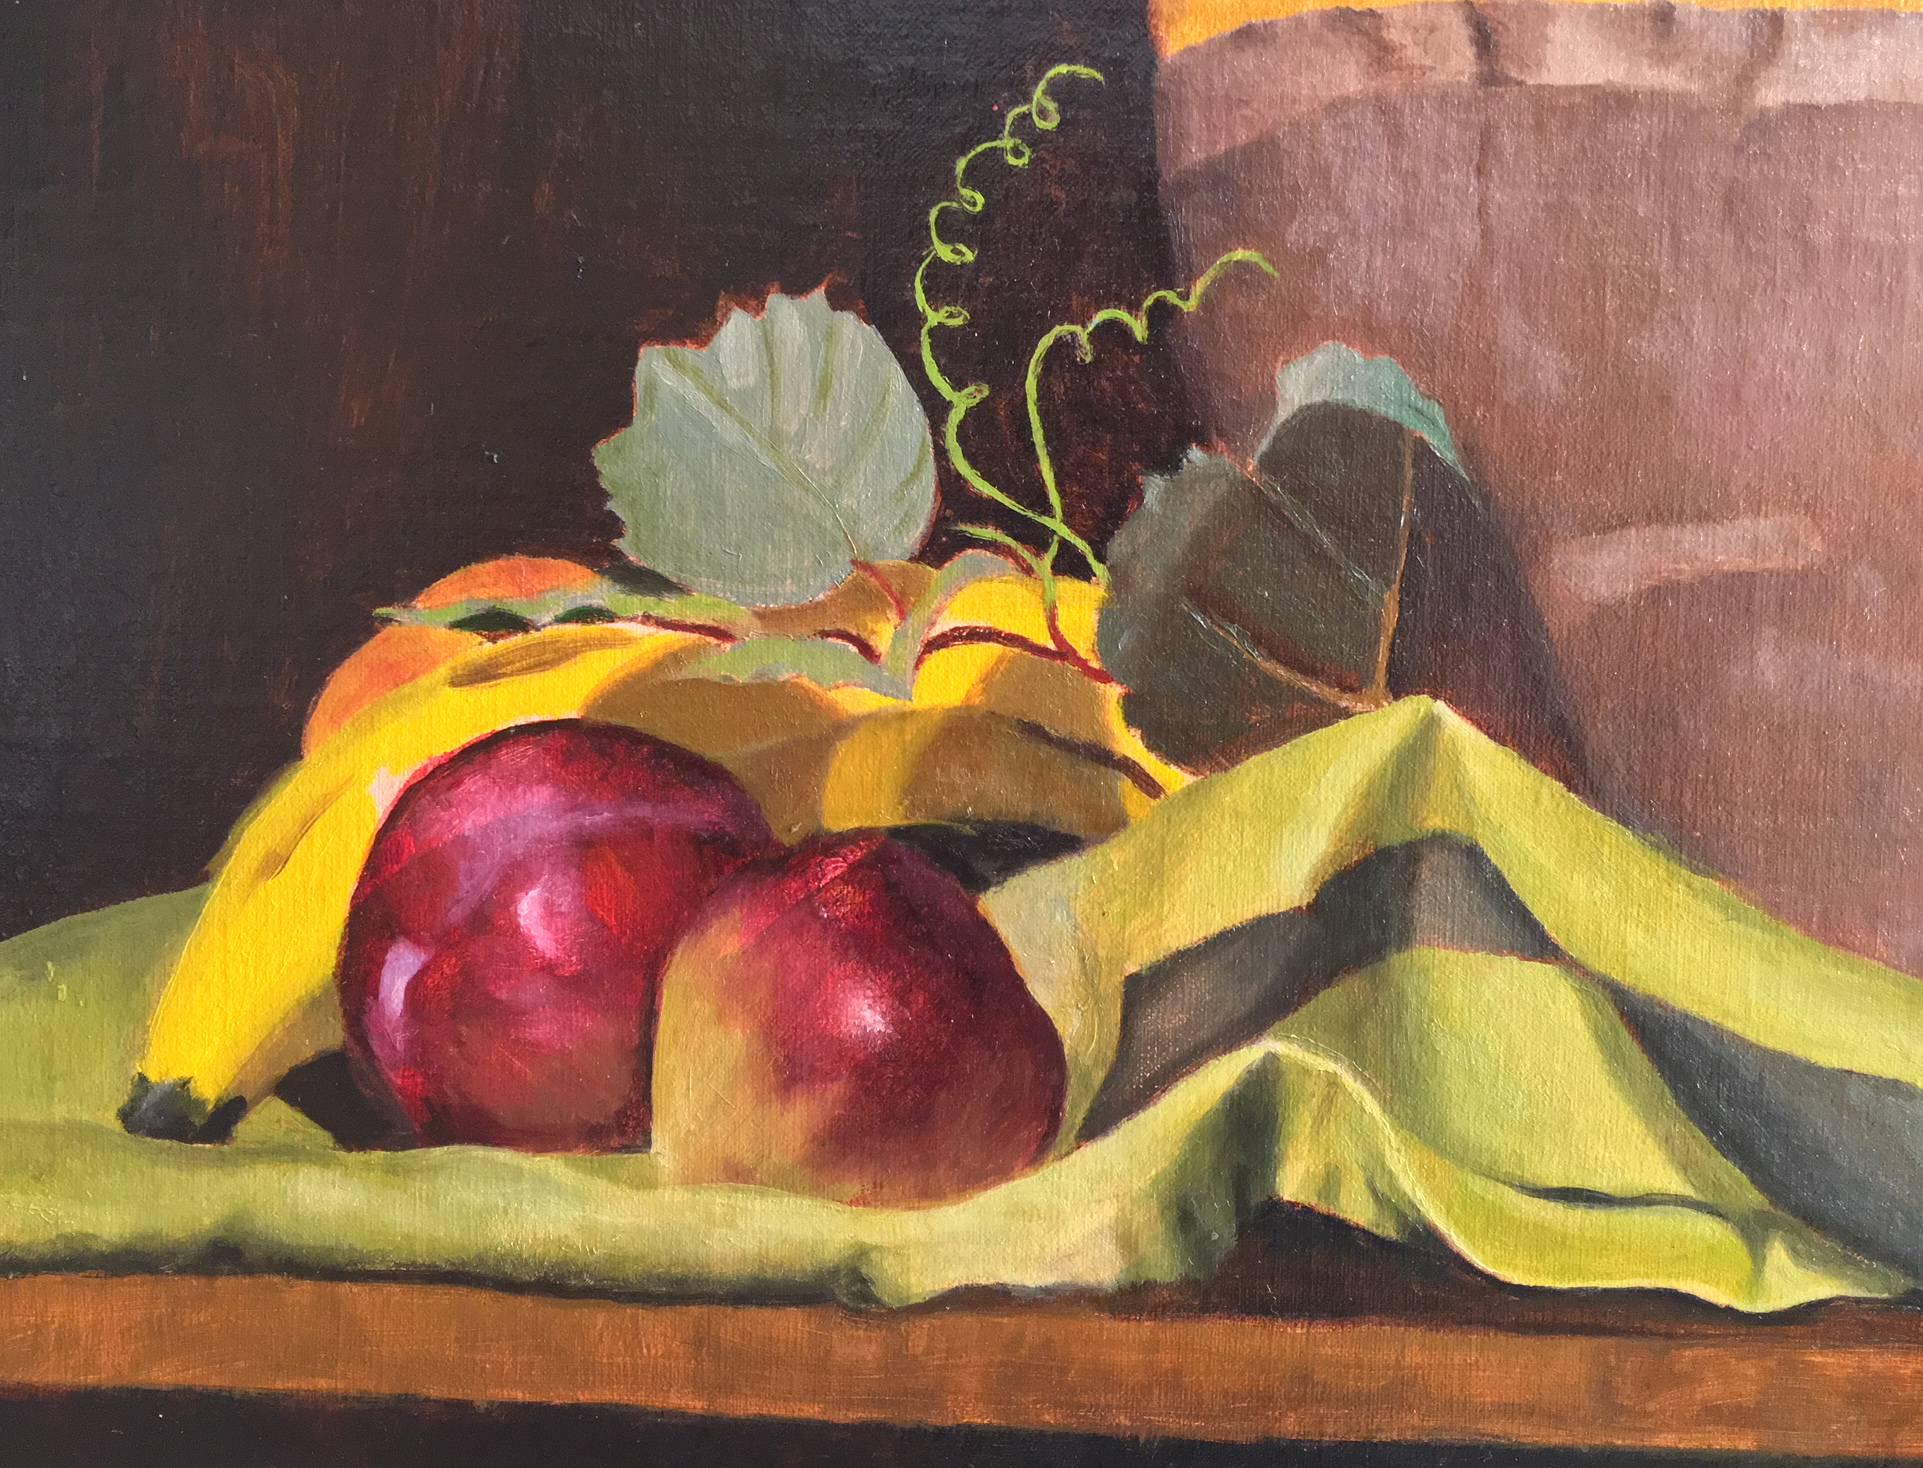 Harvest still life with pear, fig, banana, peach, grape leaves, and antique pot by Rachel Newman. Oil on fine linen with acid-free conservation mounting on panel. 

Rachel  Newman attended the Art Students League and the National Academy, both in